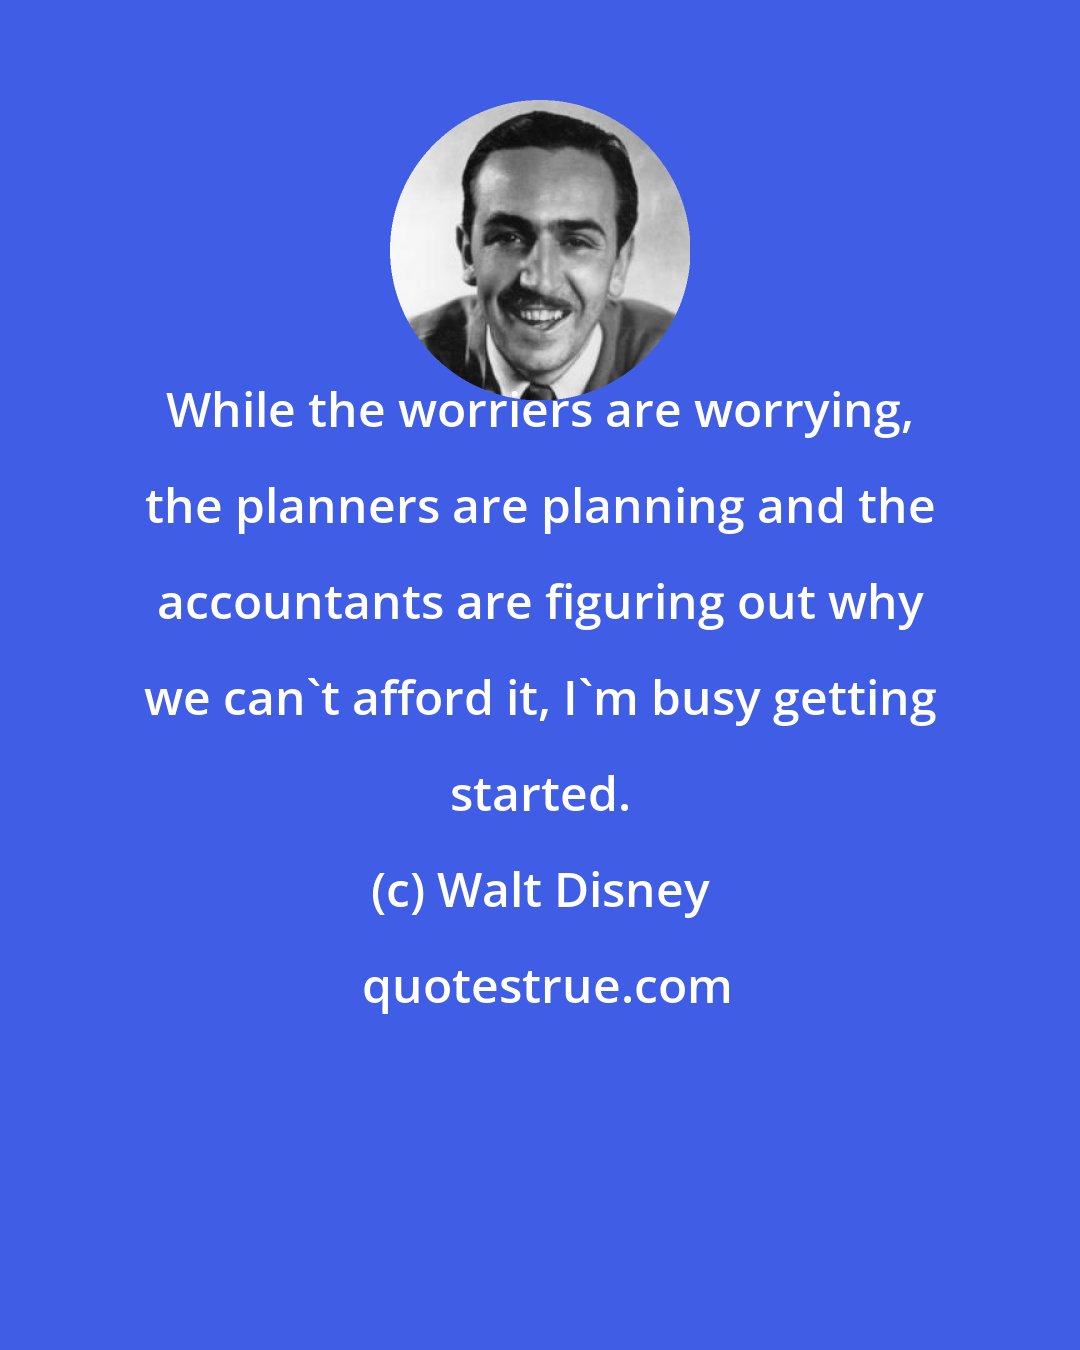 Walt Disney: While the worriers are worrying, the planners are planning and the accountants are figuring out why we can't afford it, I'm busy getting started.